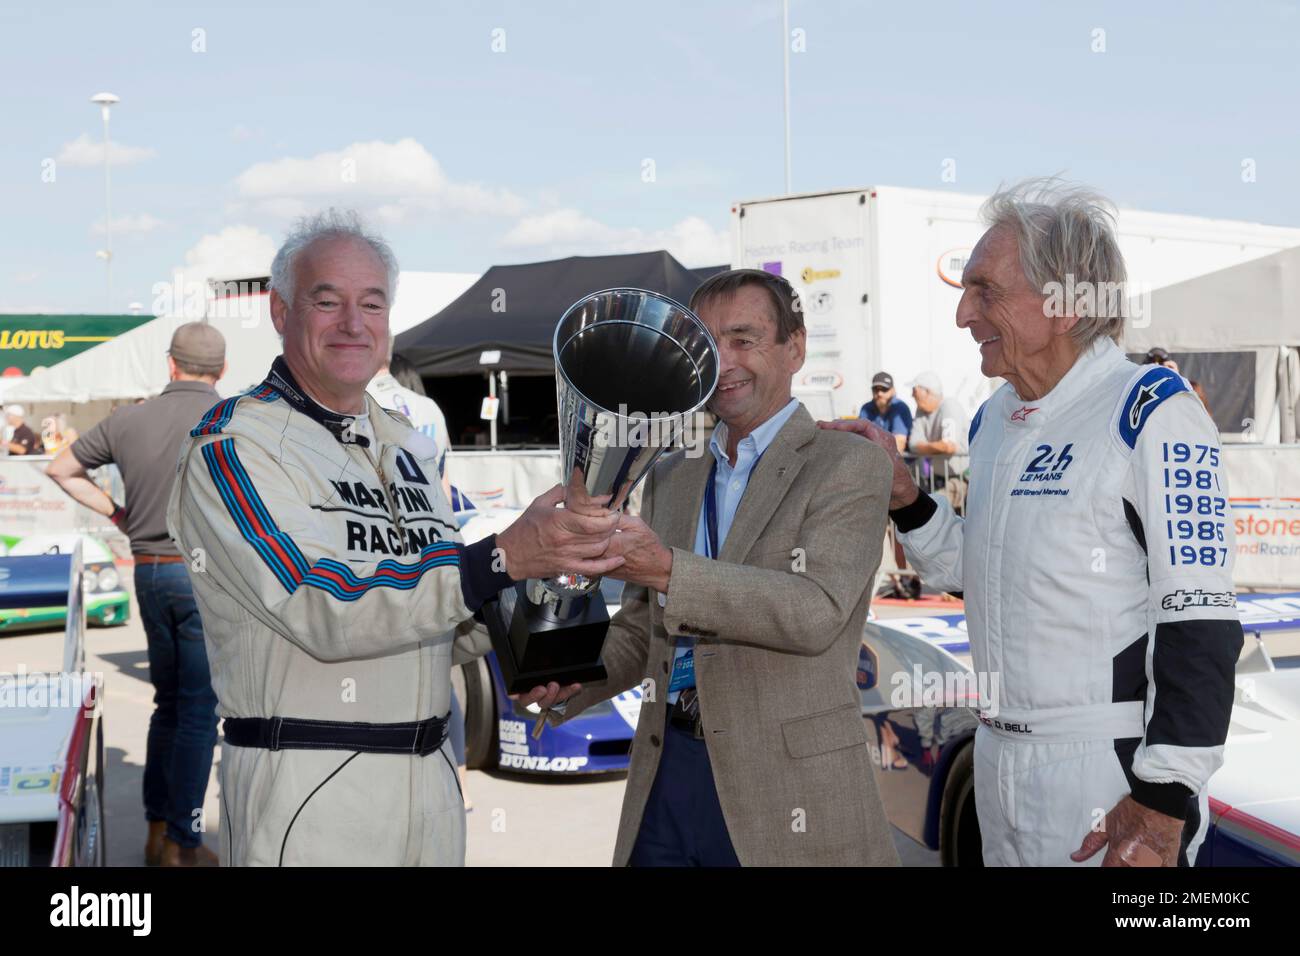 Stuart Graham presenting the Scarf & Goggles Award, to  Henry Pearmen and Derek Bell, before the Demonstration to mark the Anniversary of Group Stock Photo